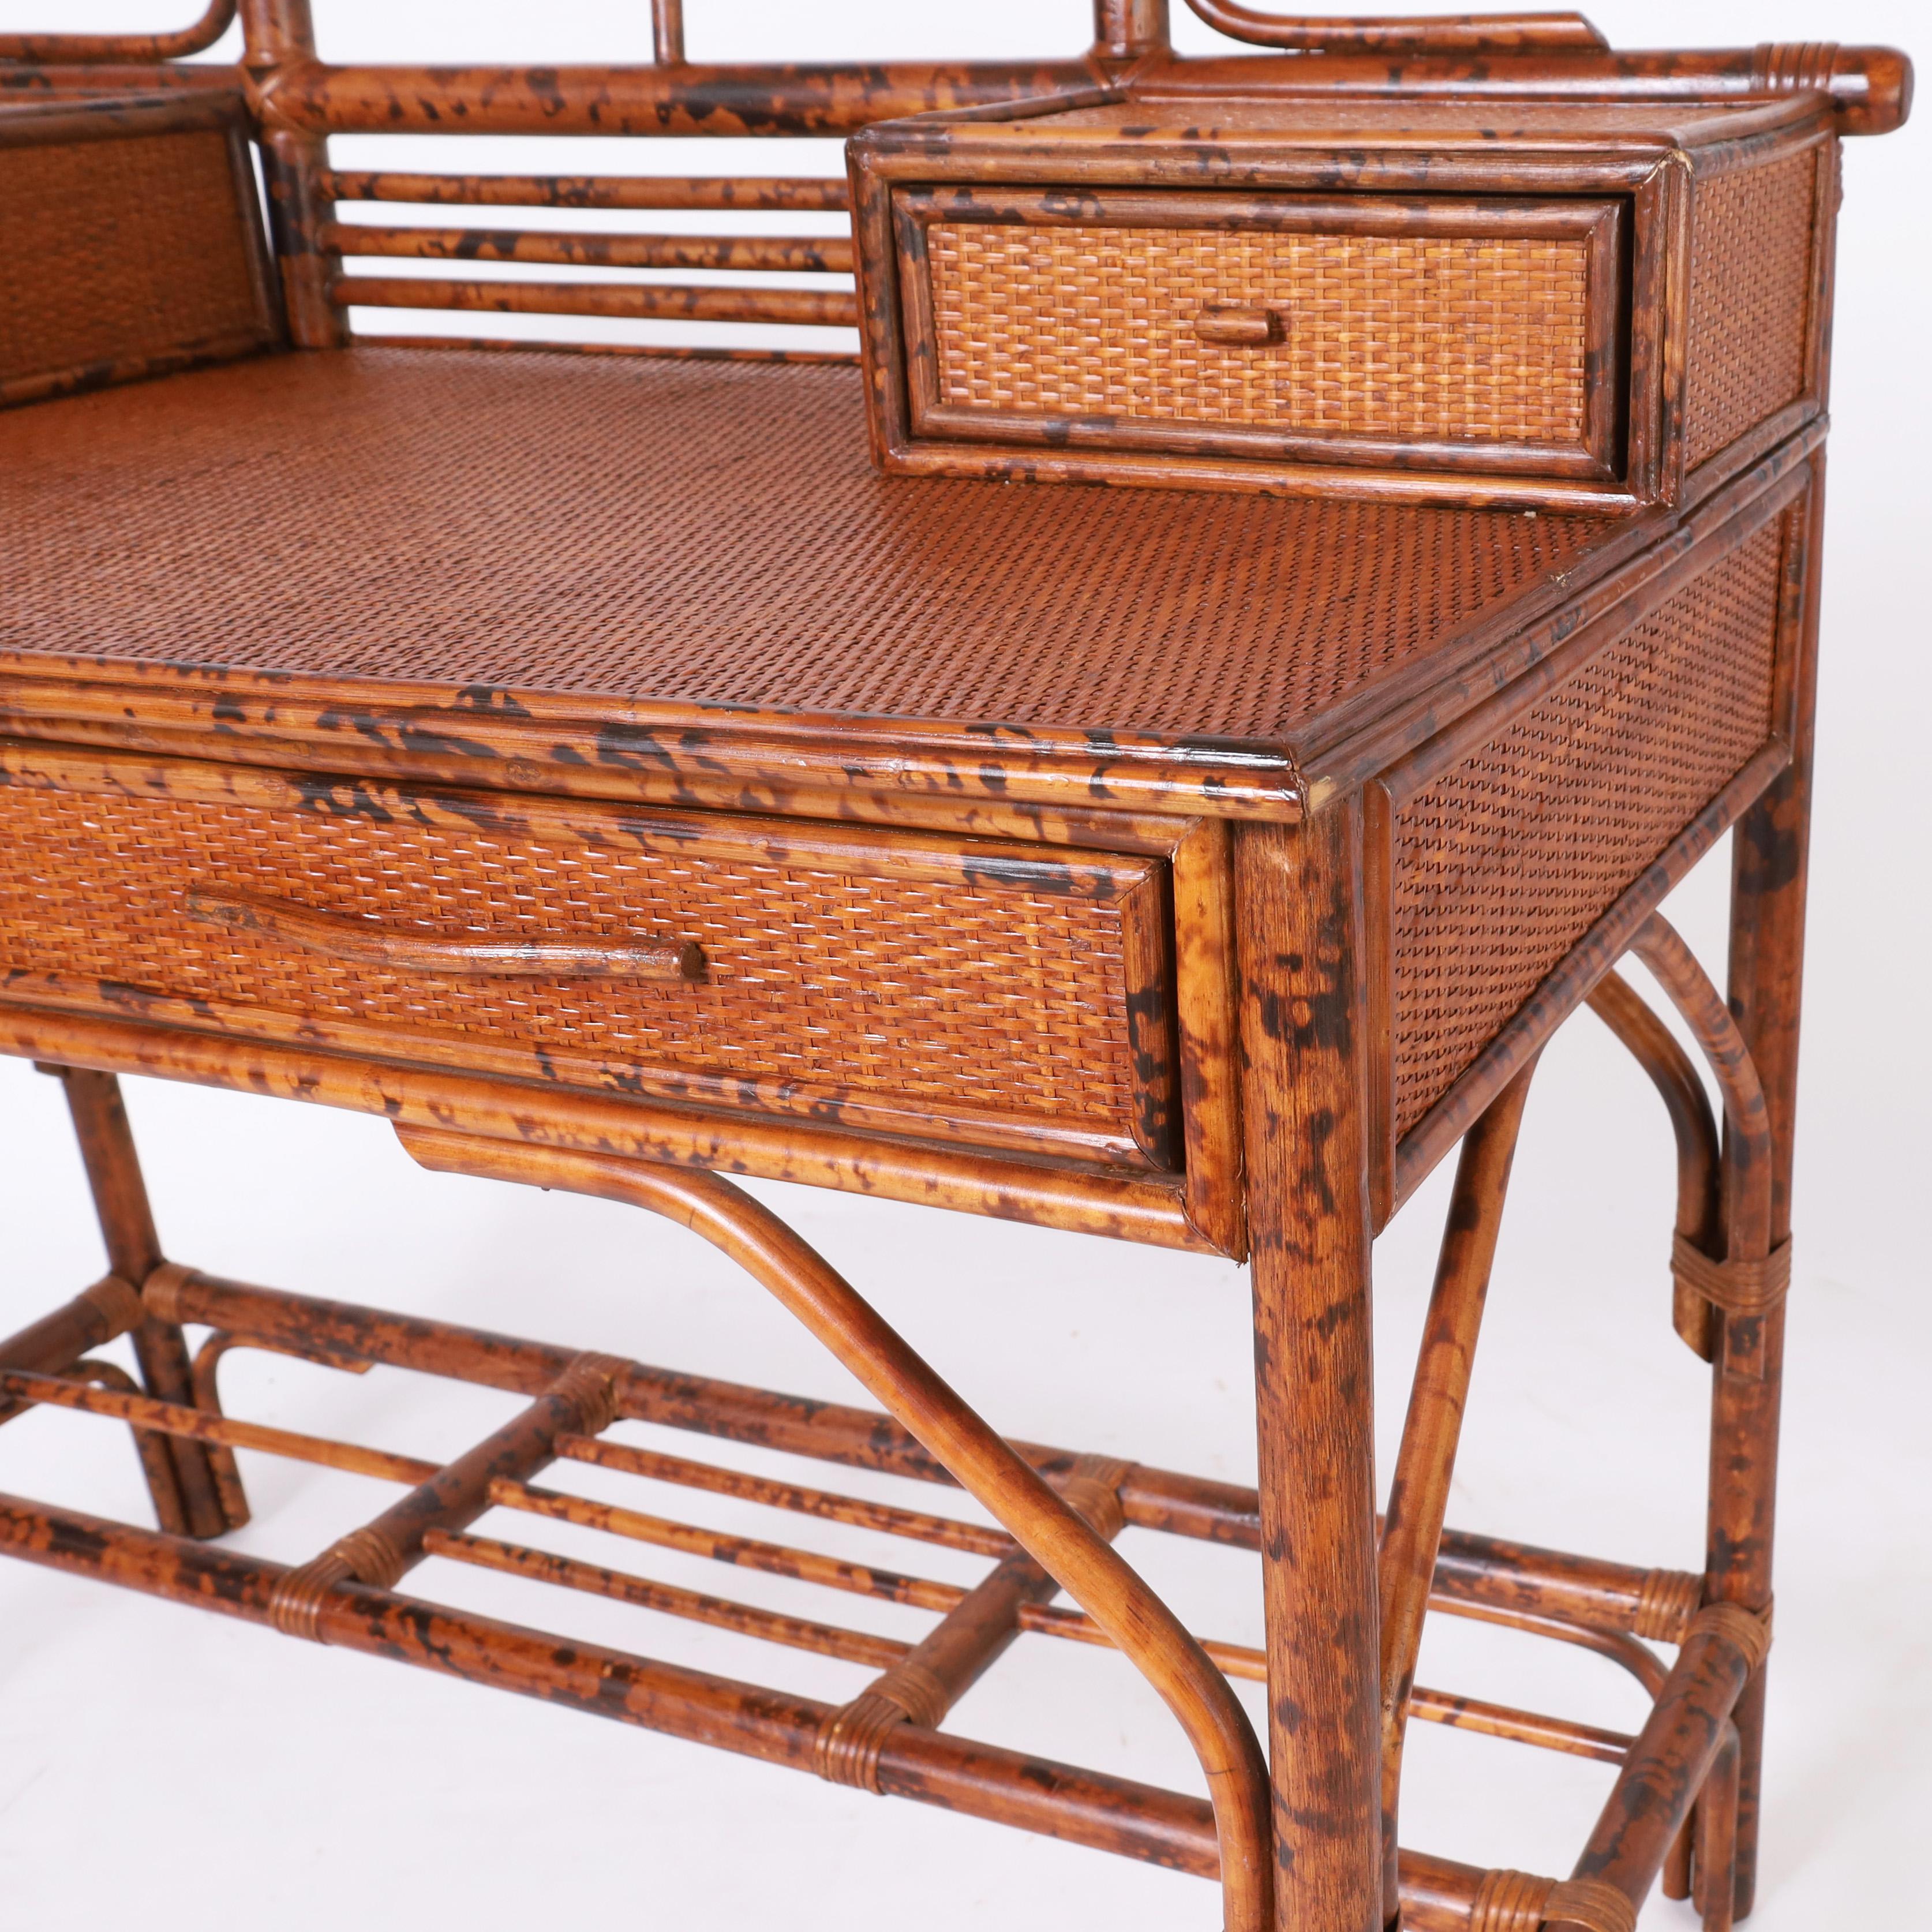 British Colonial Style Faux Bamboo and Grasscloth Pagoda Desk For Sale 2